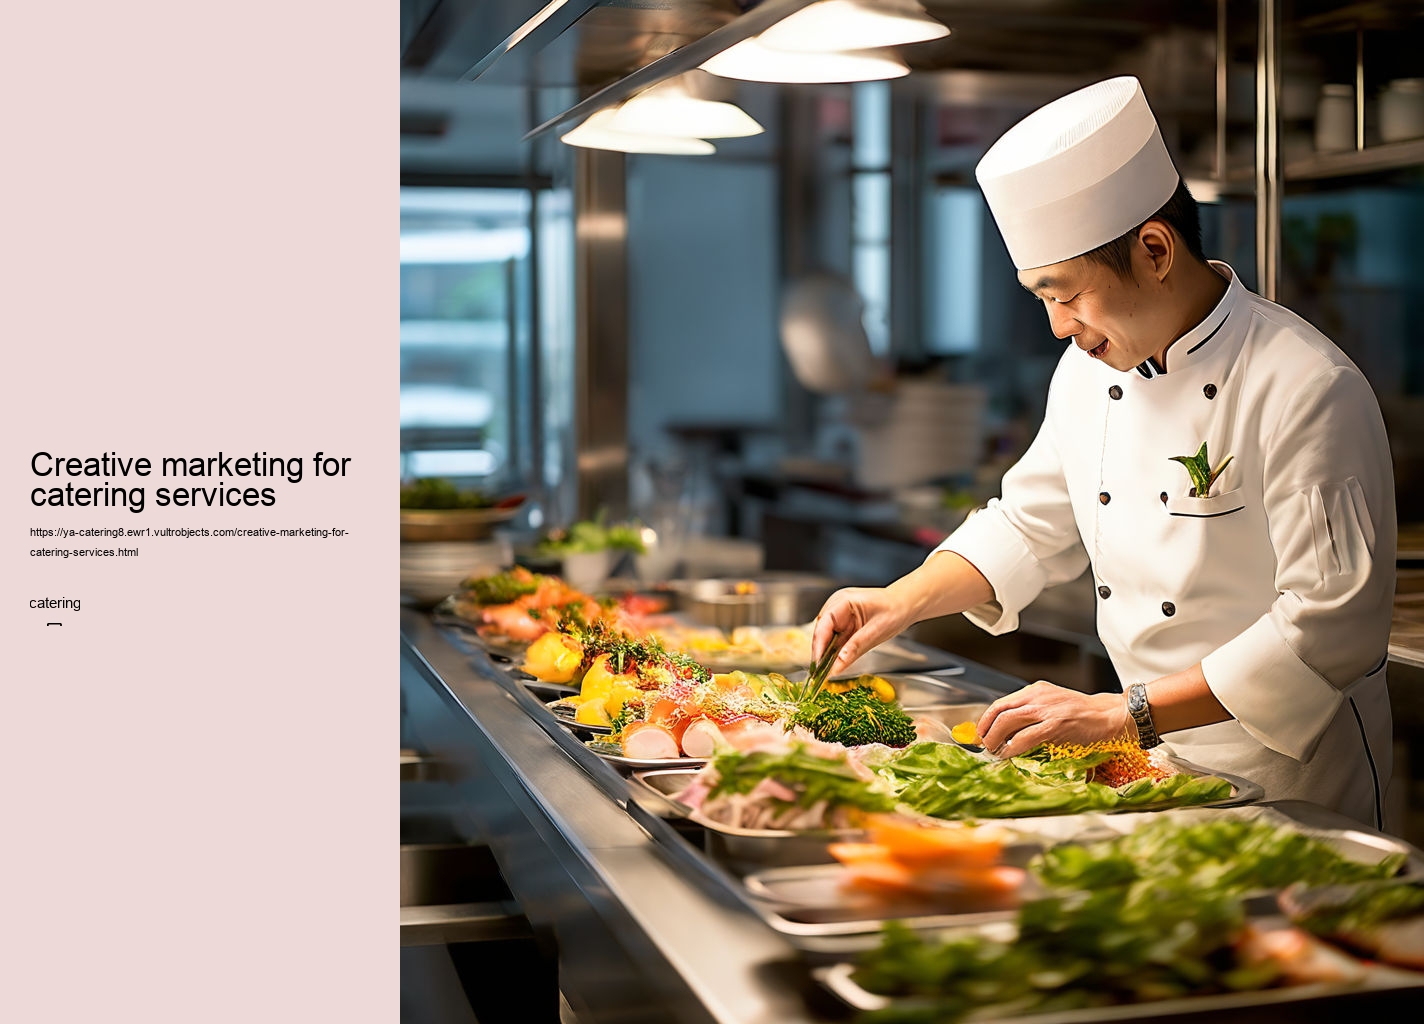 Creative marketing for catering services